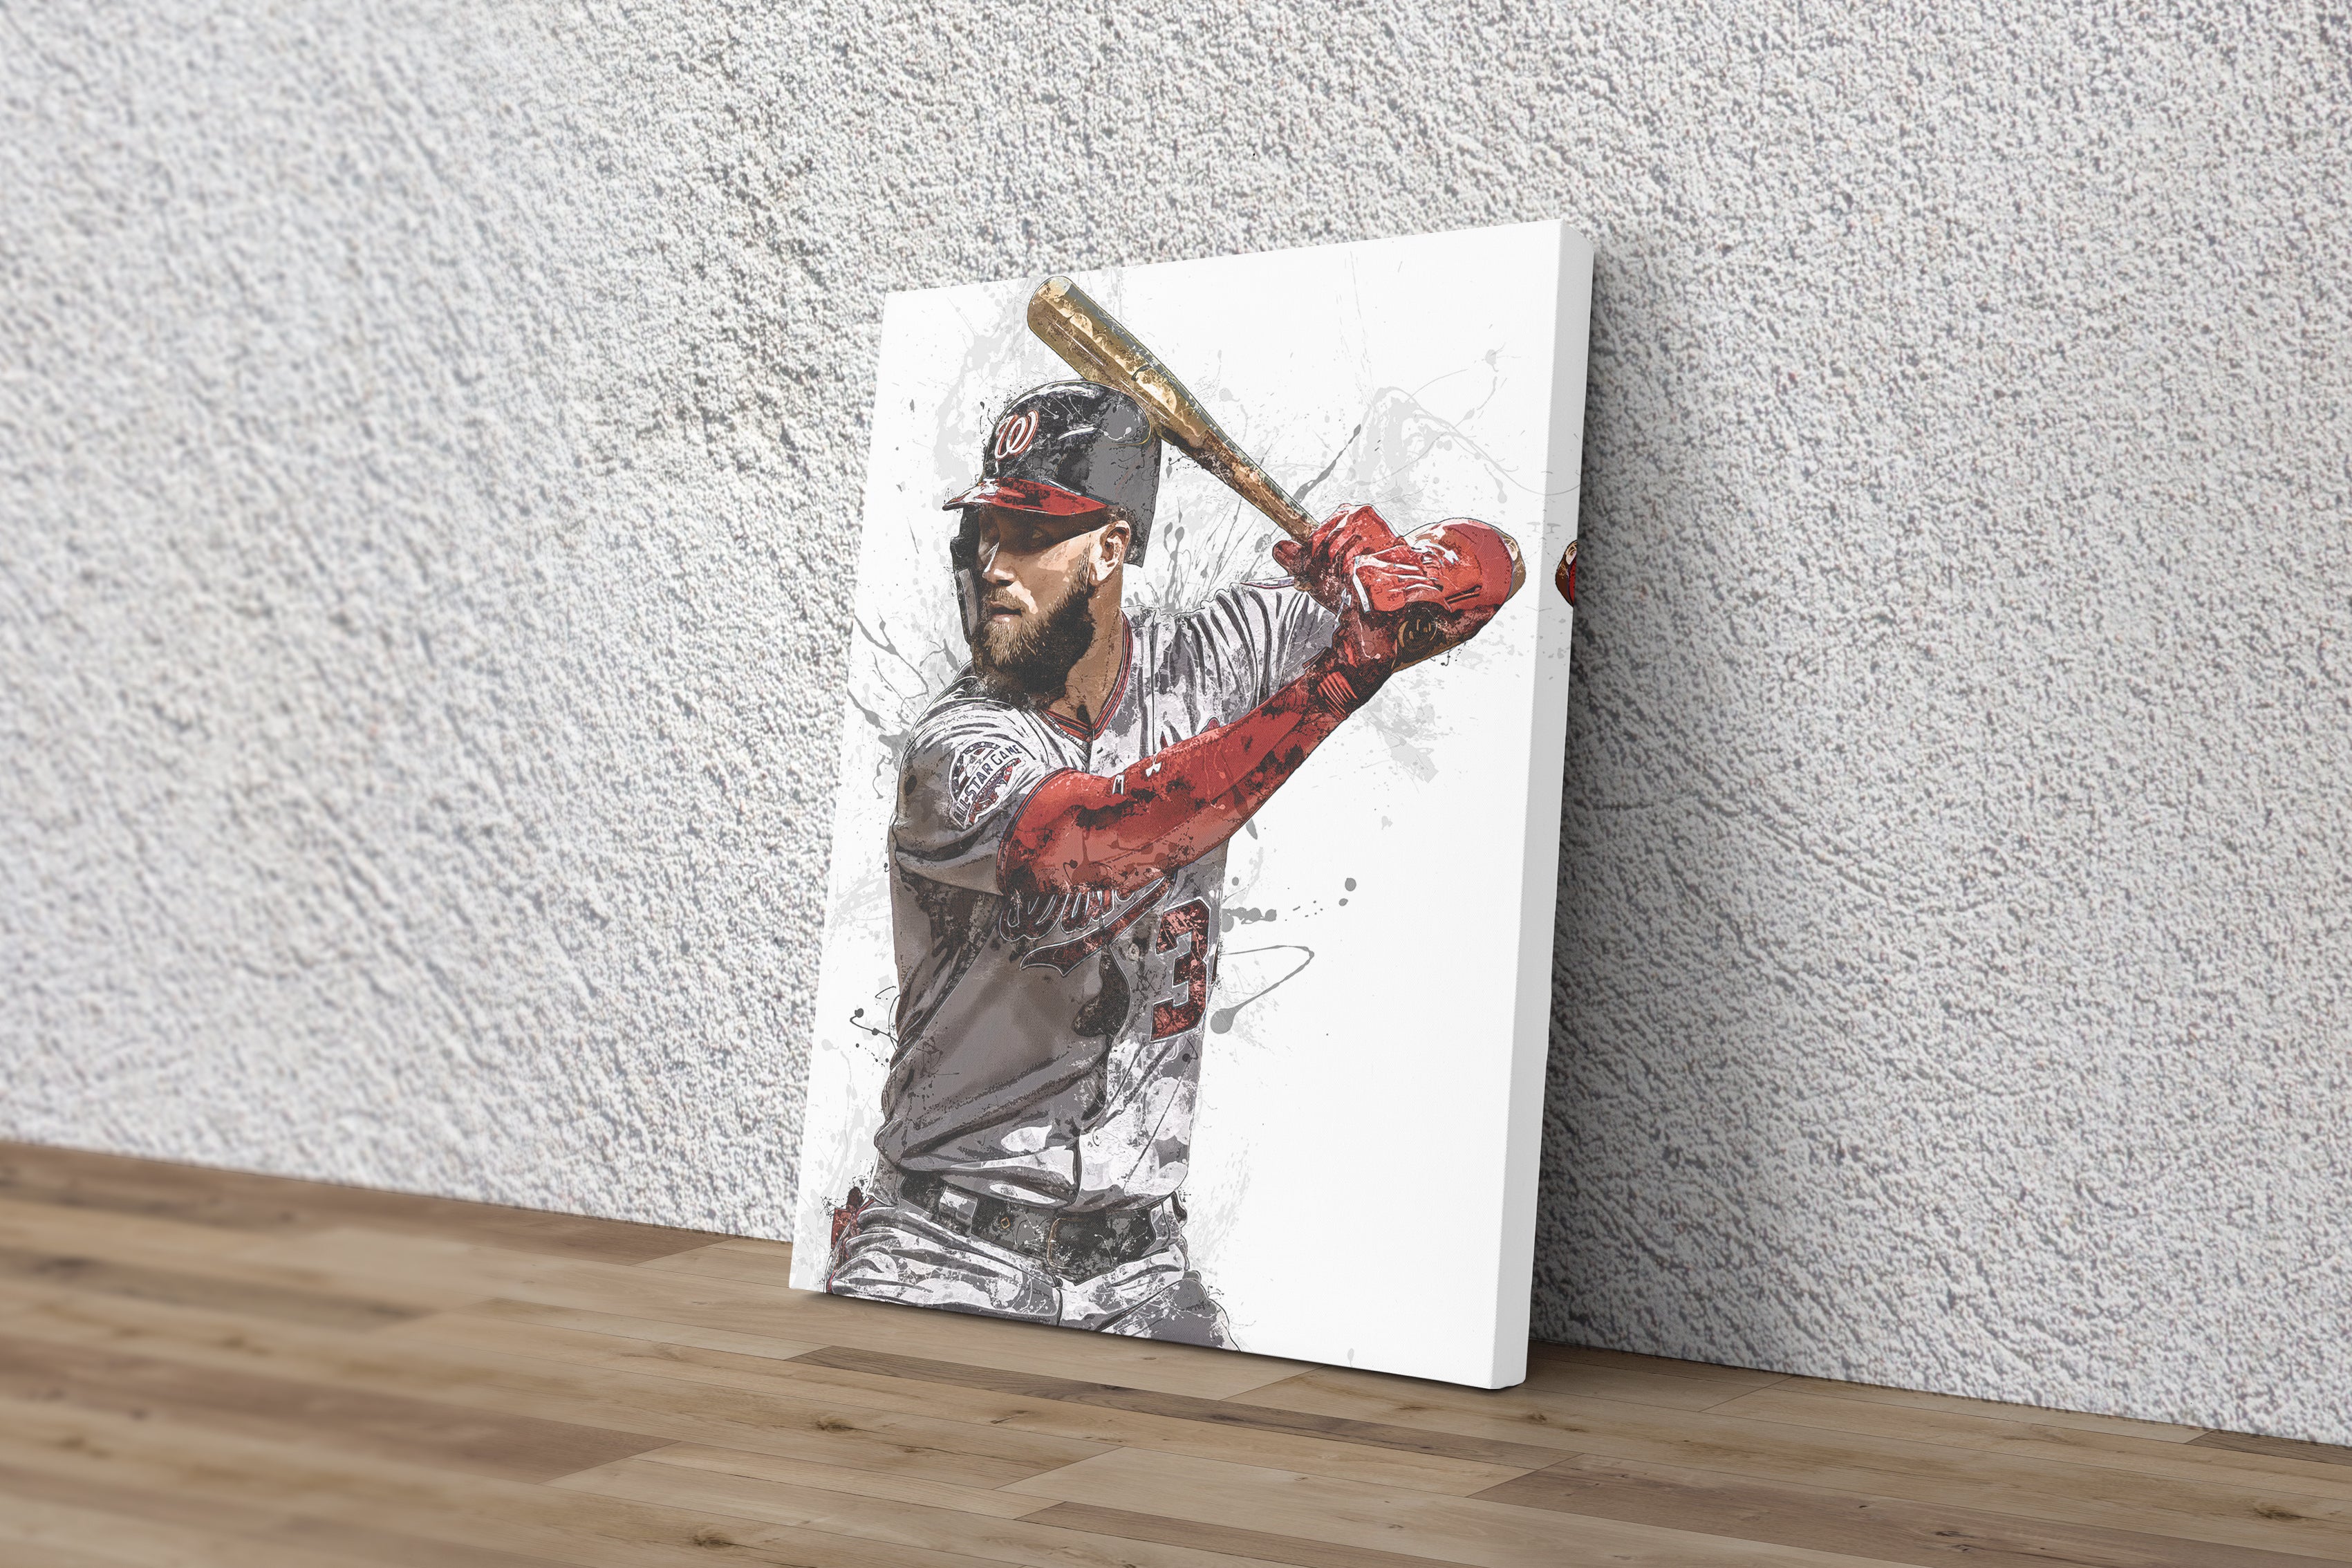  Bryce Harper Baseball Player Poster 10 Art Poster Canvas  Painting Decor Wall Print Photo Gifts Home Modern Decorative Posters  Framed/Unframed 24x36inch(60x90cm): Posters & Prints